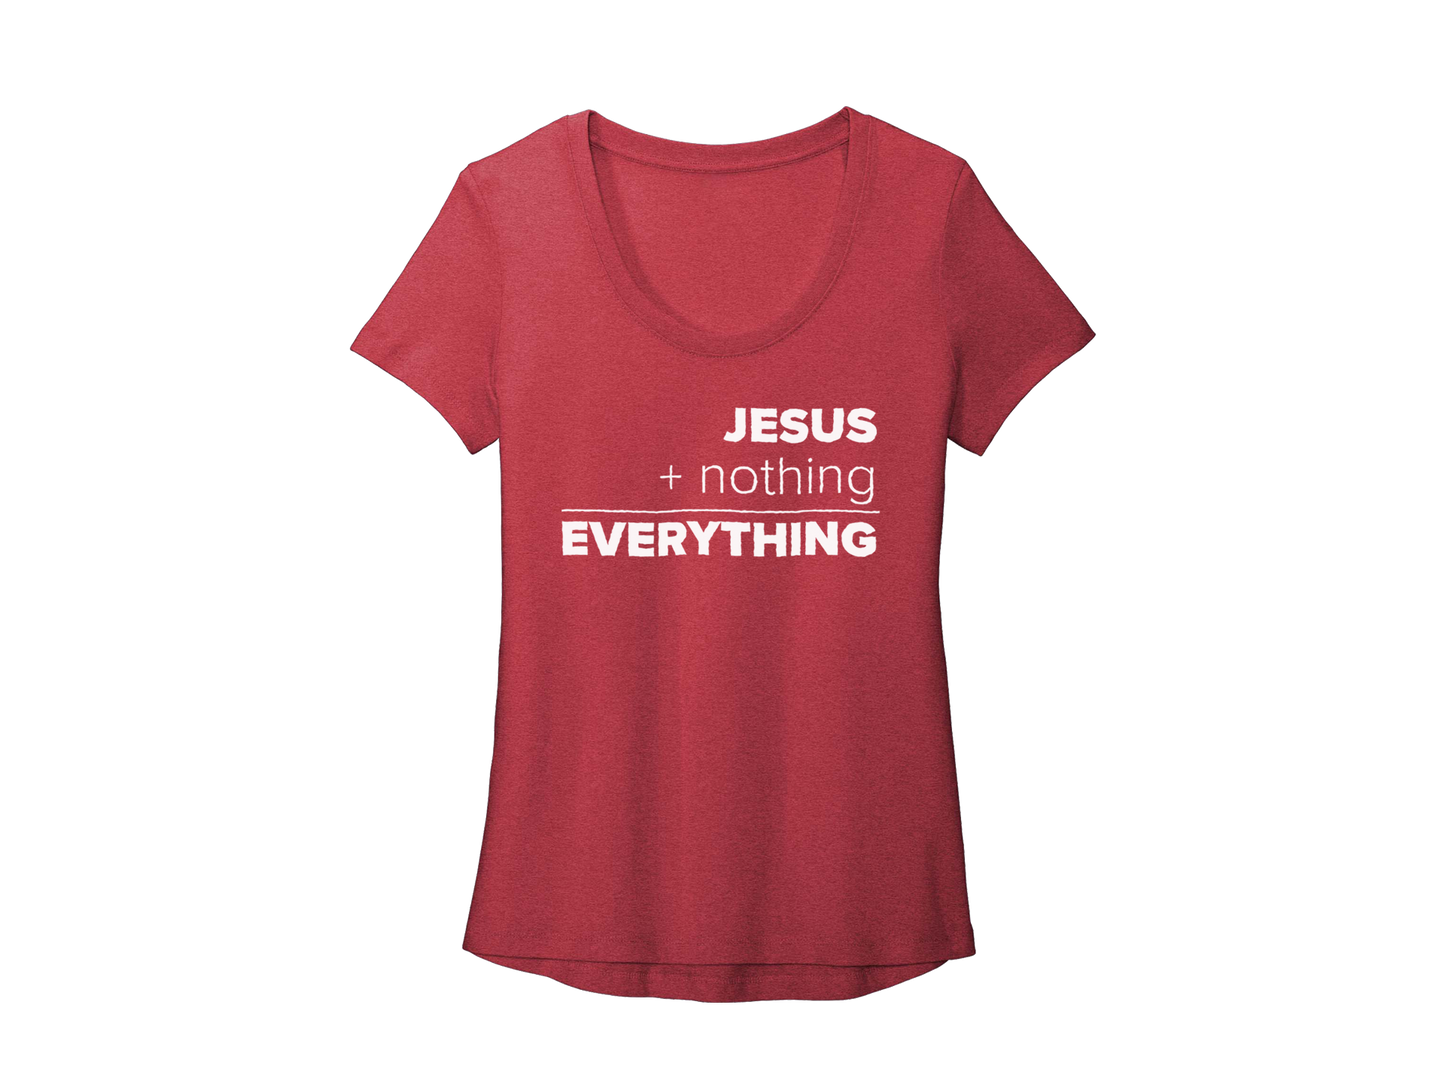 JESUS EQUALS EVERYTHING WOMEN'S RED - CHRISTIAN T-SHIRT